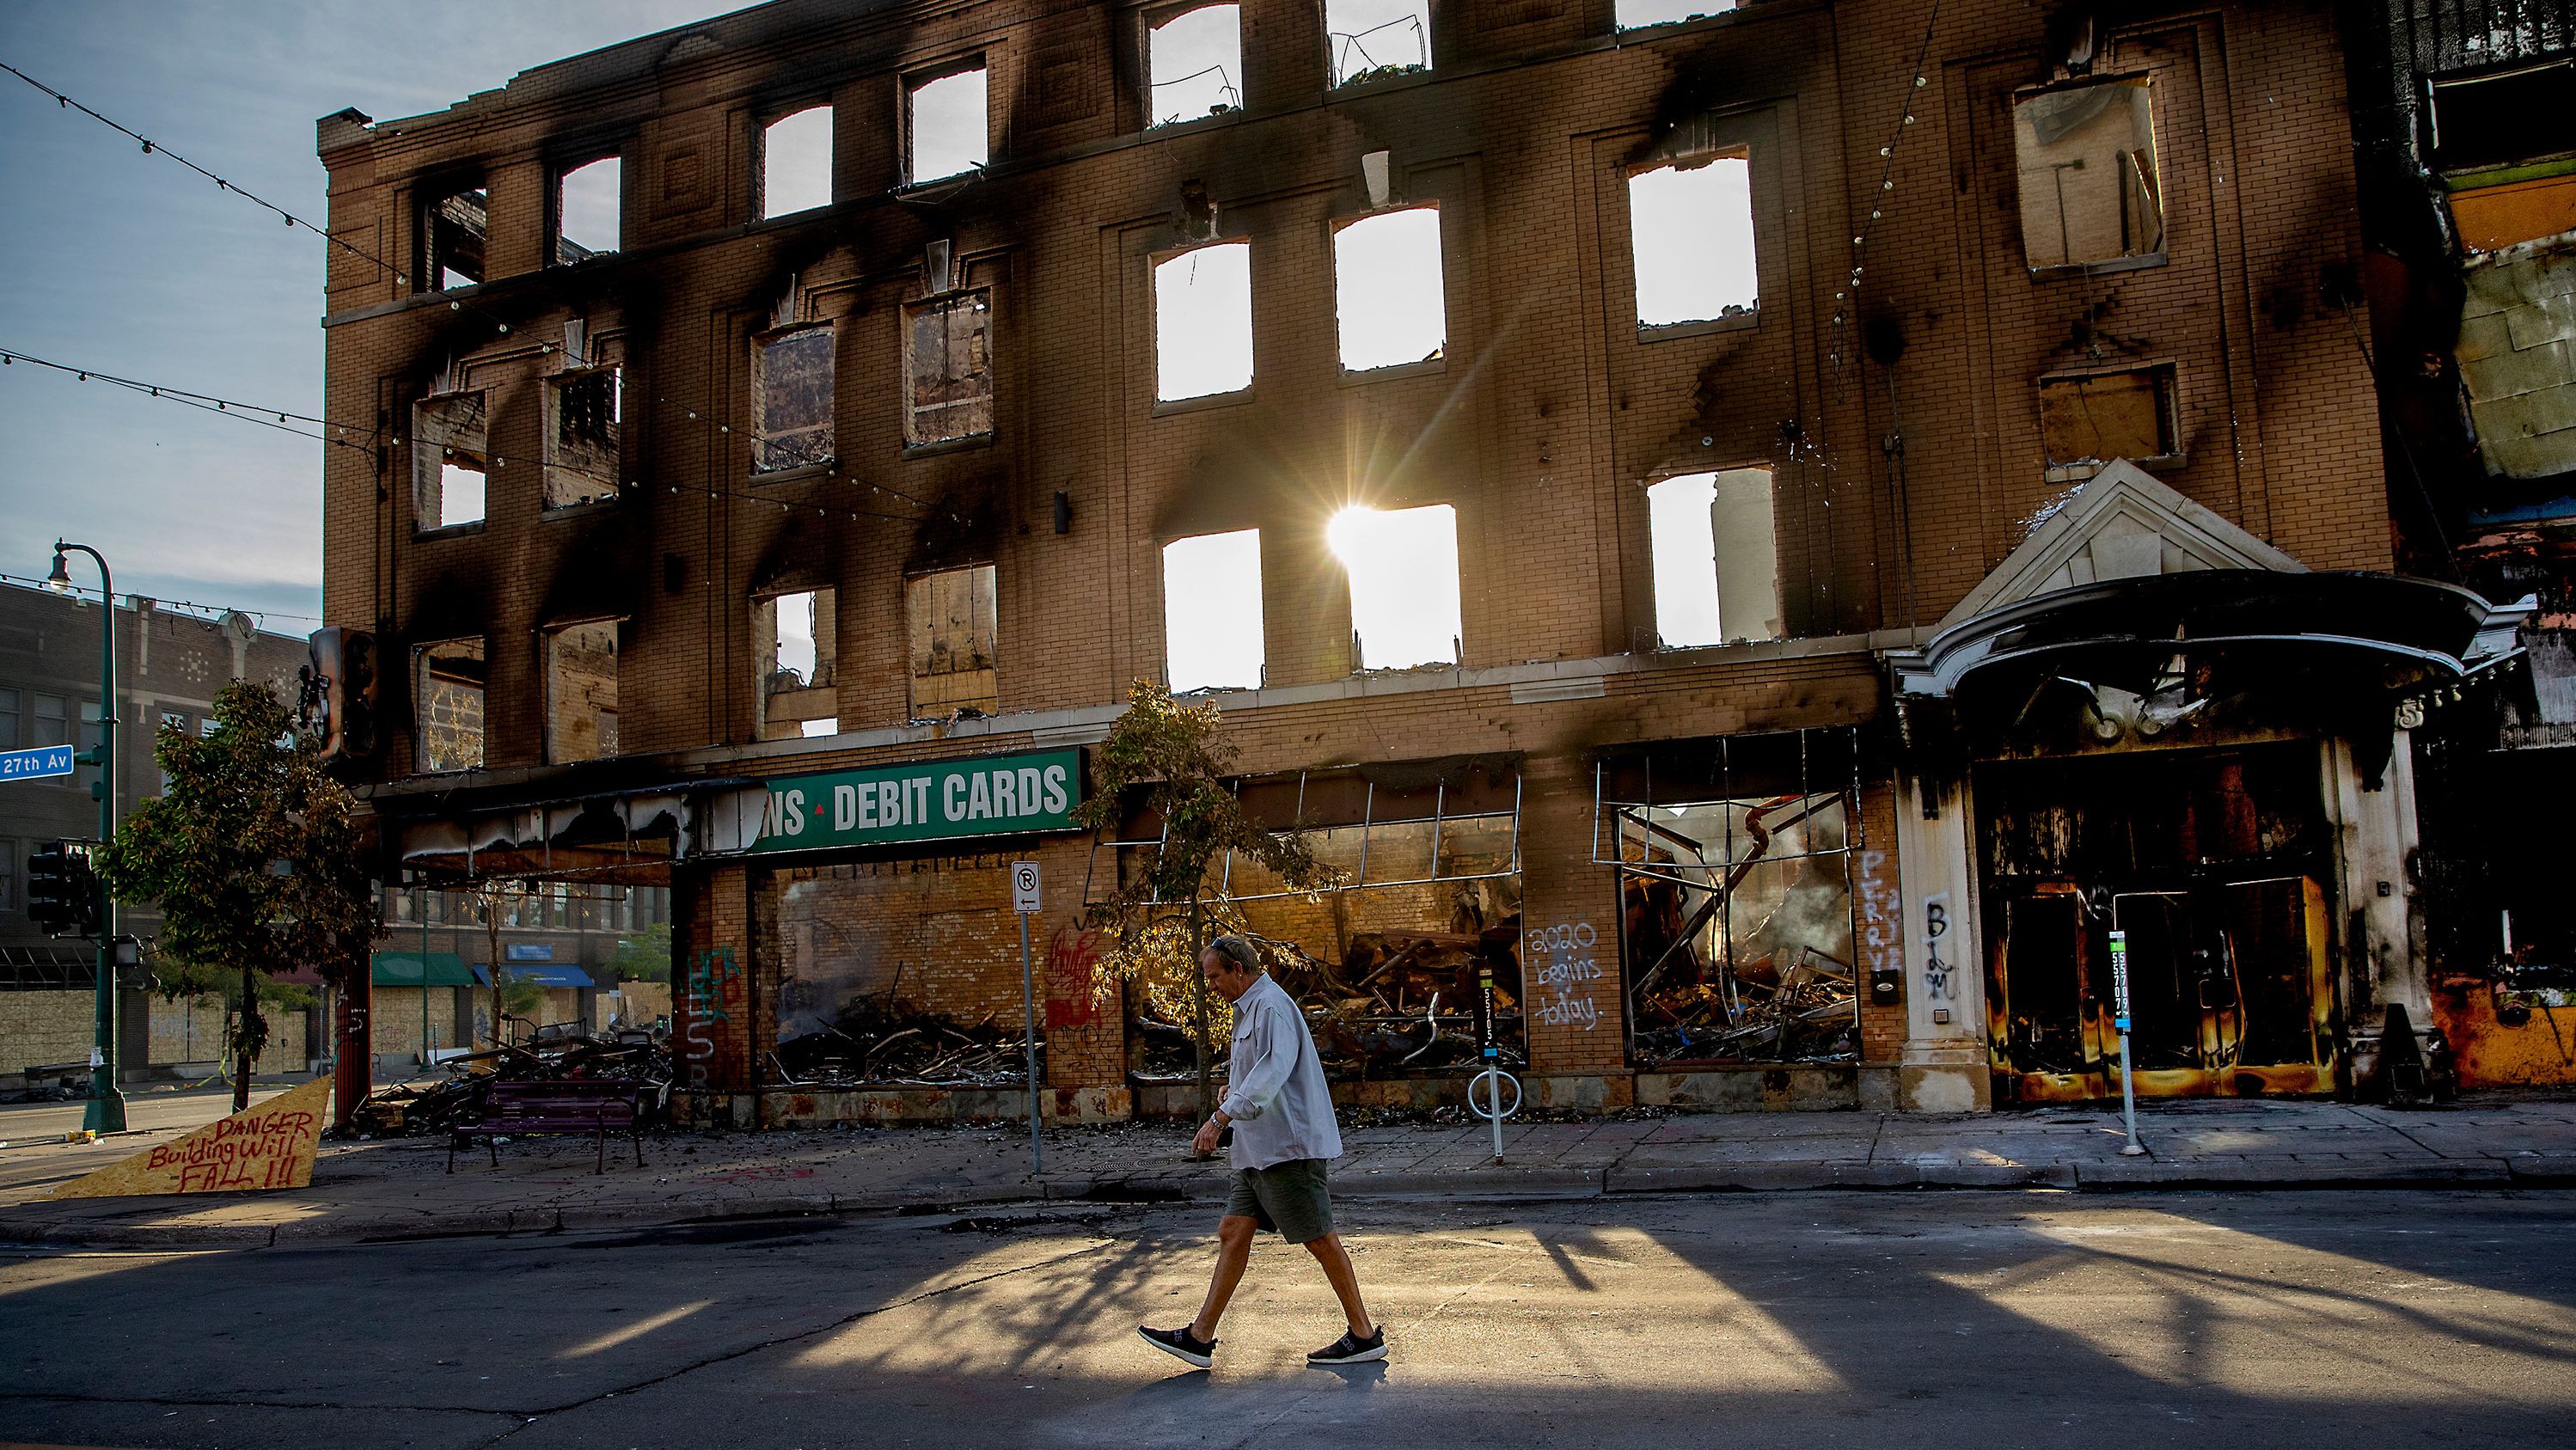 A man walks past a damaged building following overnight protests over the death of George Floyd, Sunday, May 31, 2020, in Minneapolis.  